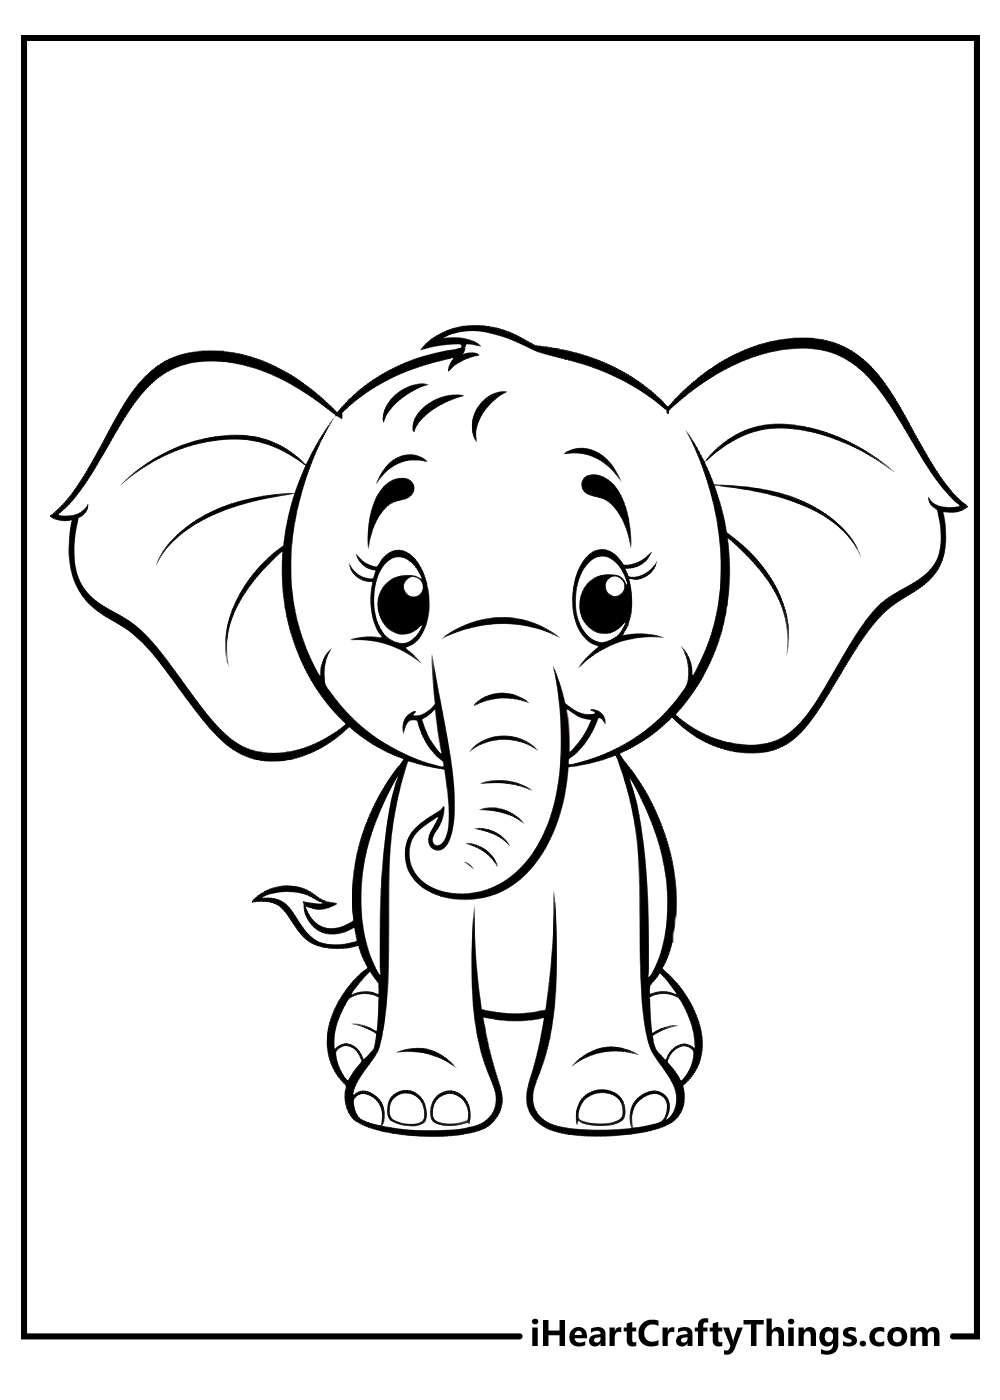 elephant coloring printable for kids